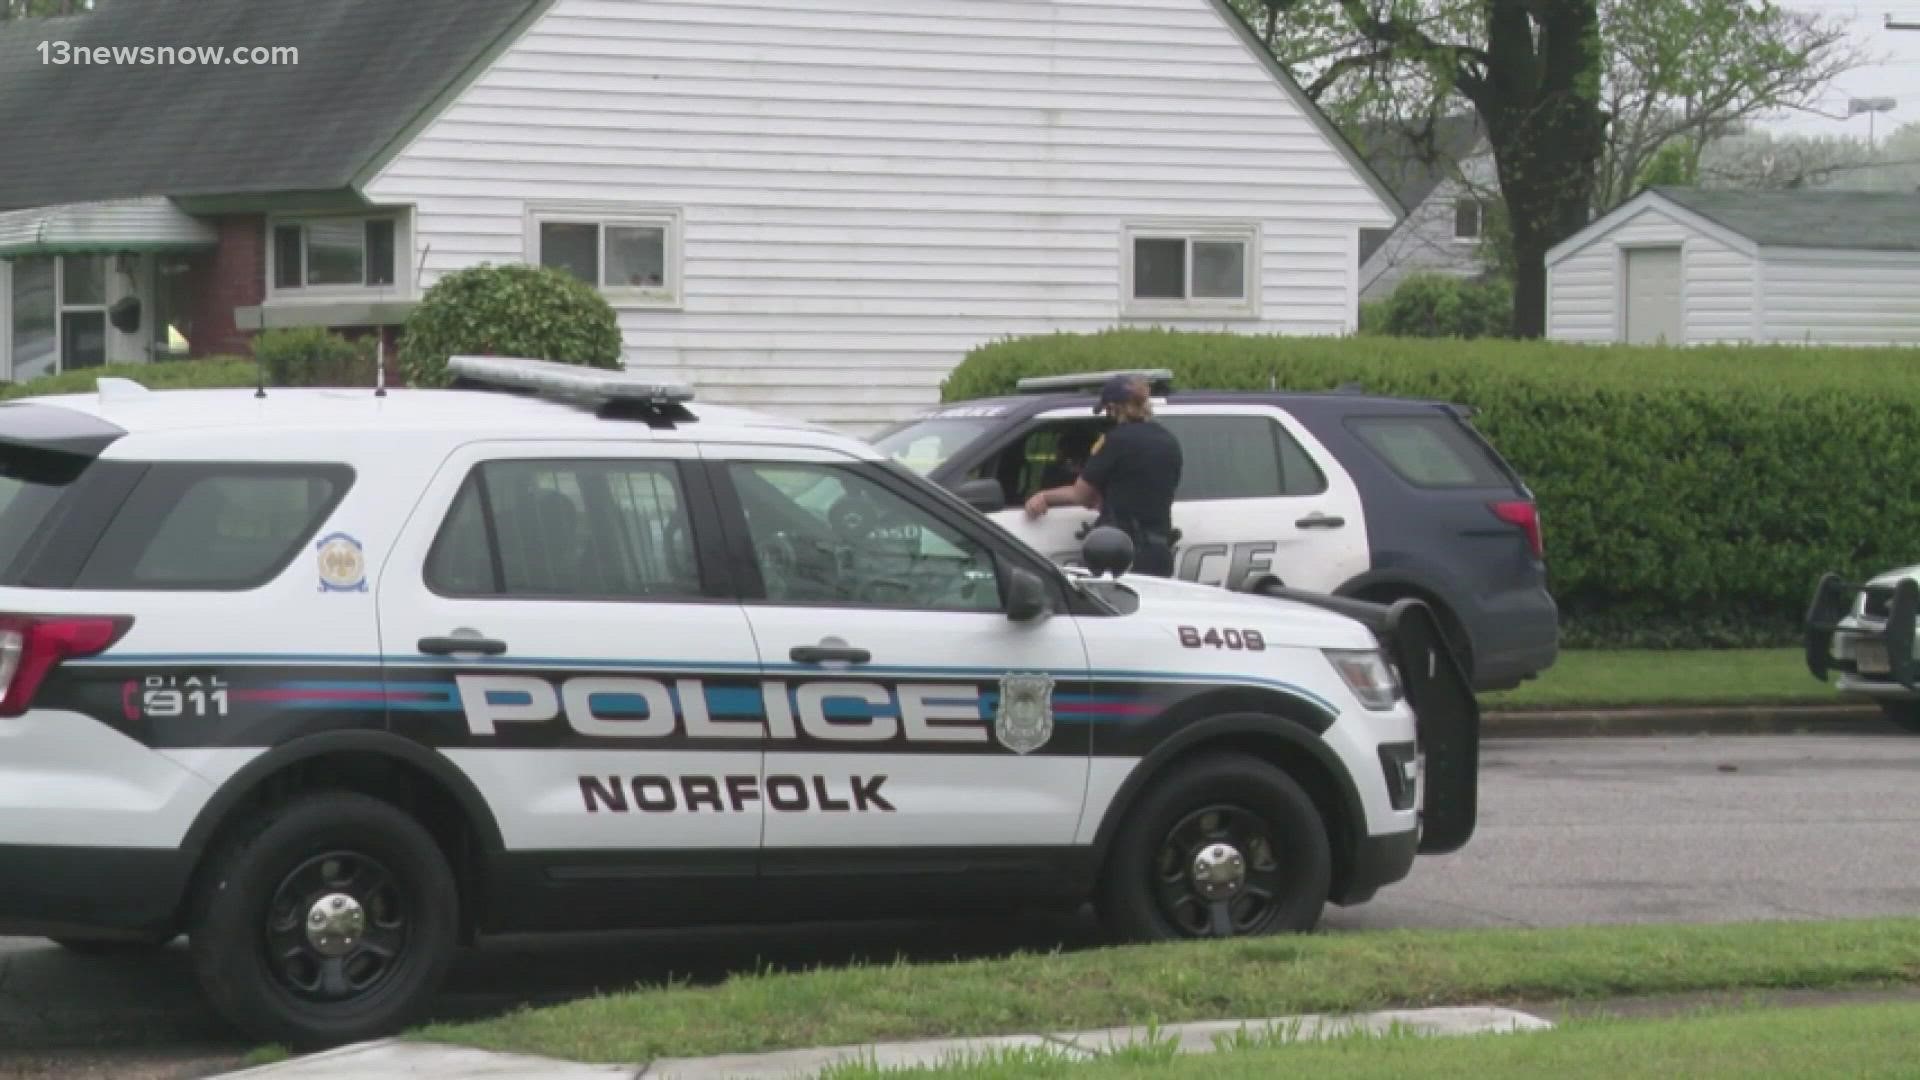 Norfolk Police Chief Larry Boone's retirement comes at a point when officers are demanding change within the department.